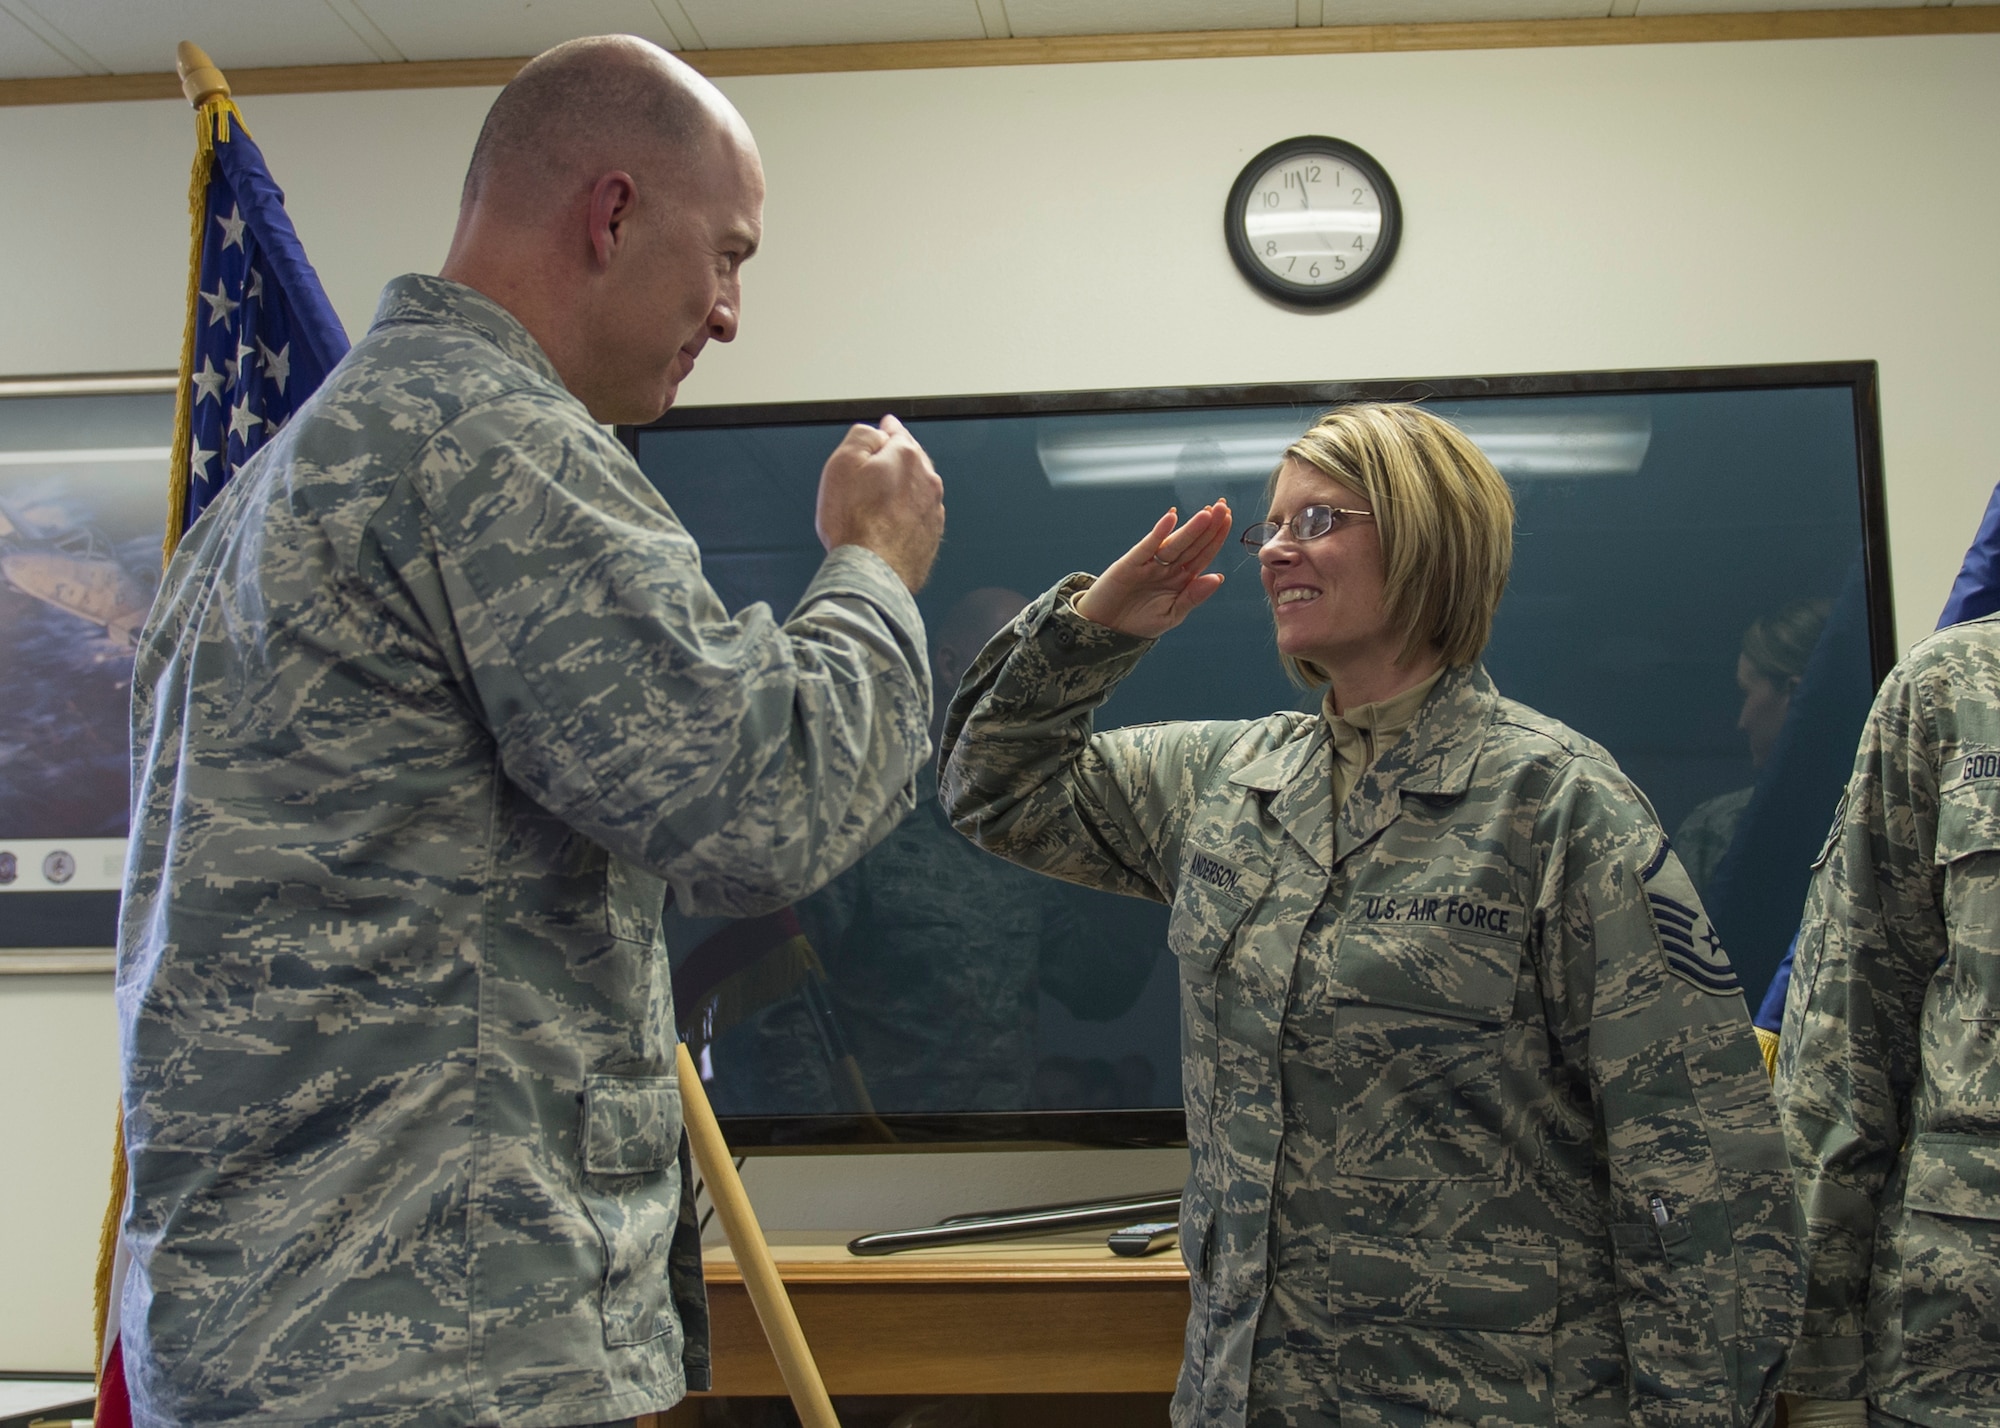 Master Sgt. Mindi Anderson is recognized as the SNCO Organizational Management Excellence award for the 2015 Air National Guard Medical Service Annual Awards program at Gowen Field, Boise, Idaho on Dec. 5, 2015. This program exists to recognize Airmen whose outstanding actions improve the delivery of health care and contribute to expeditionary medical operations for our Air Force Personnel worldwide. 